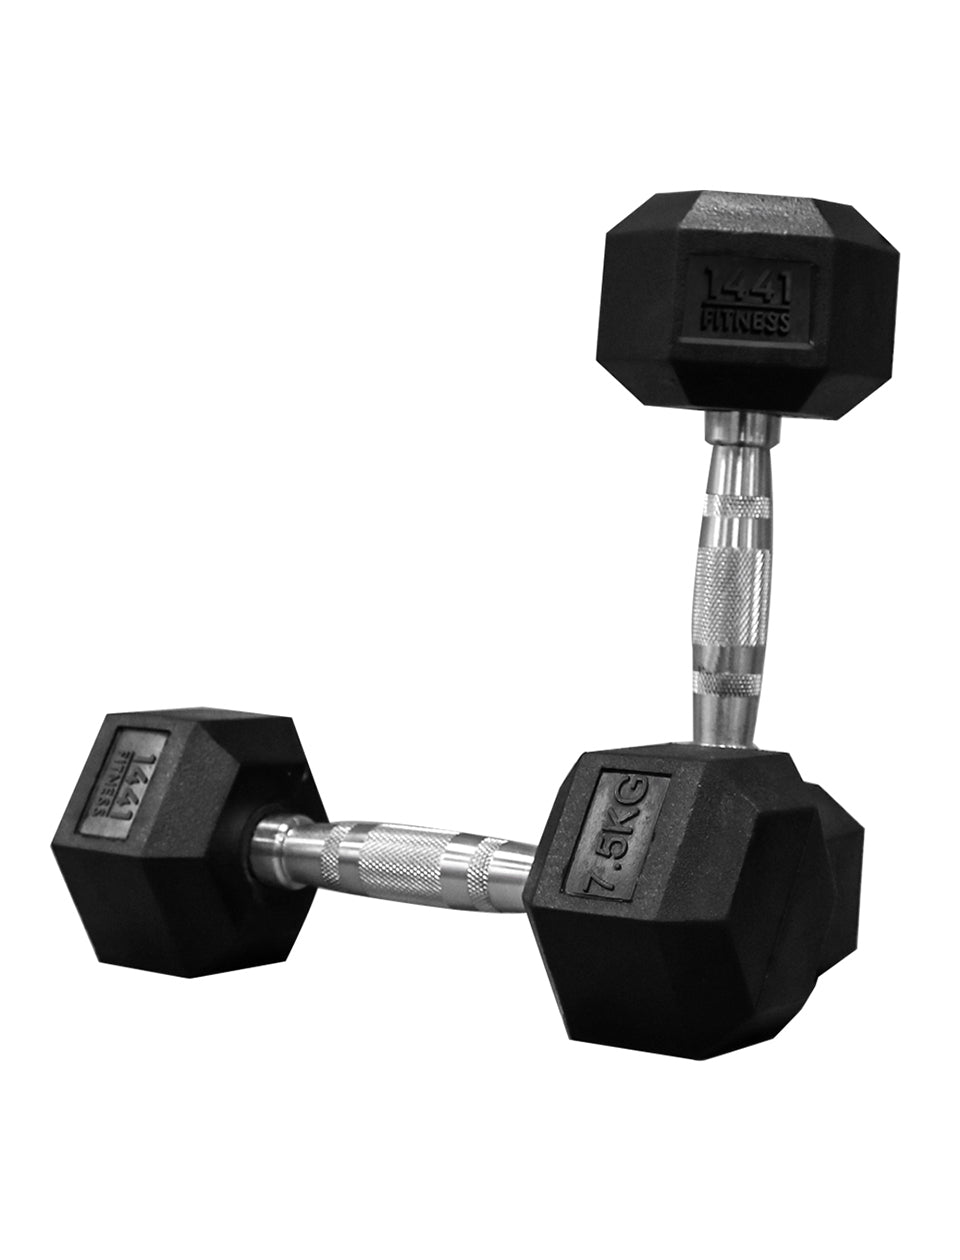 1441 Fitness Hex Dumbbells Combo Set - 2.5 KG to 20 KG ( 8 Pairs)